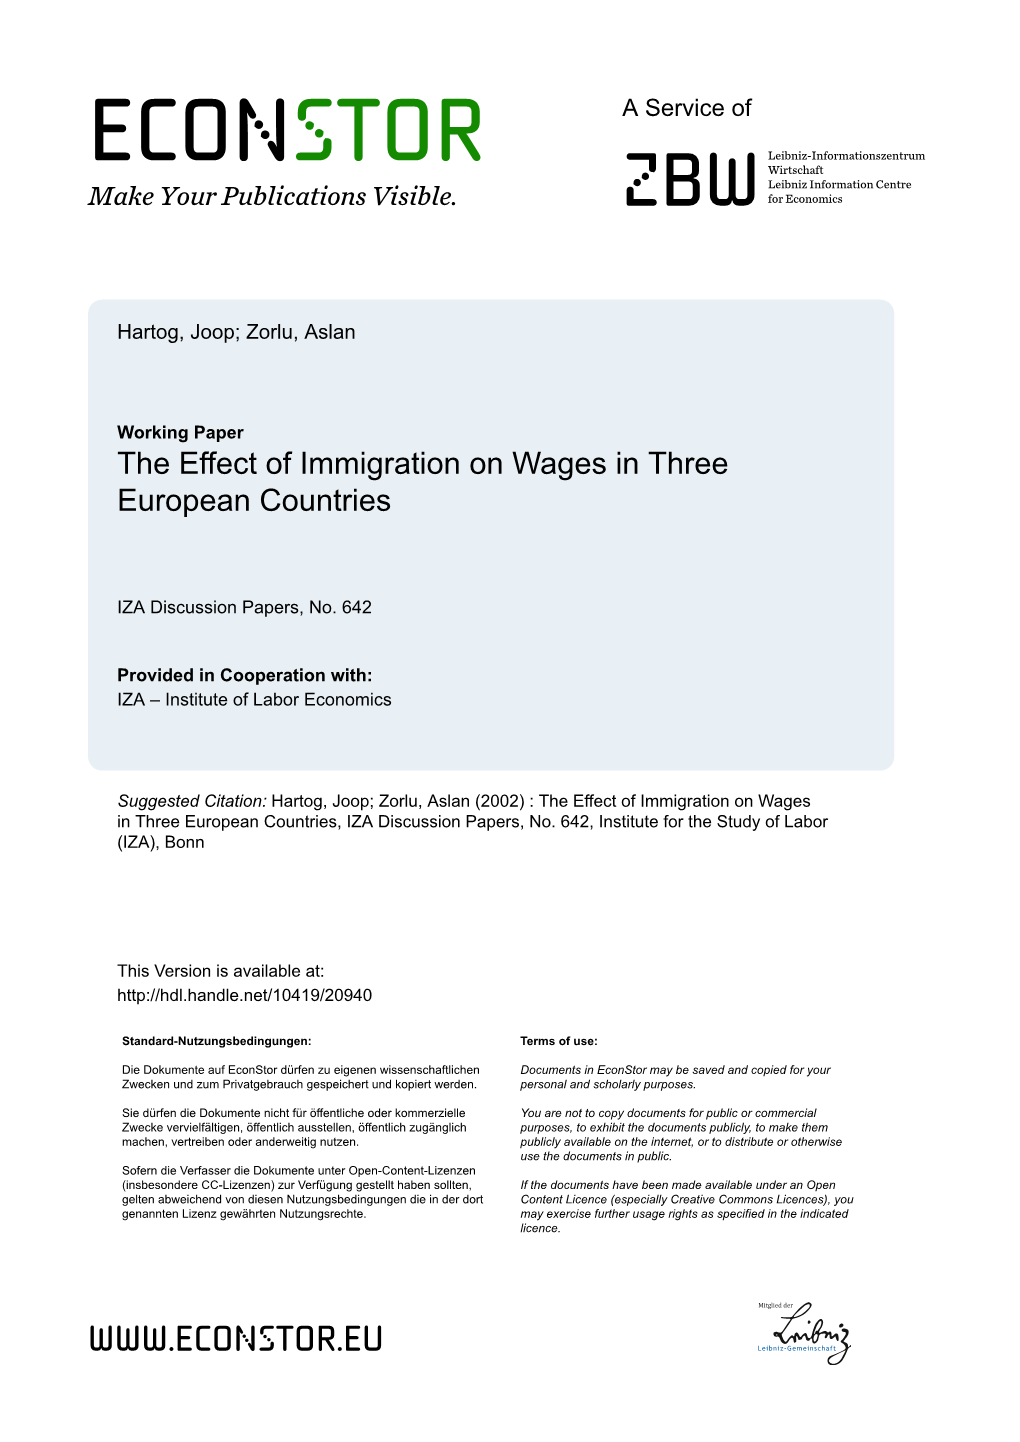 The Effect of Immigration on Wages in Three European Countries